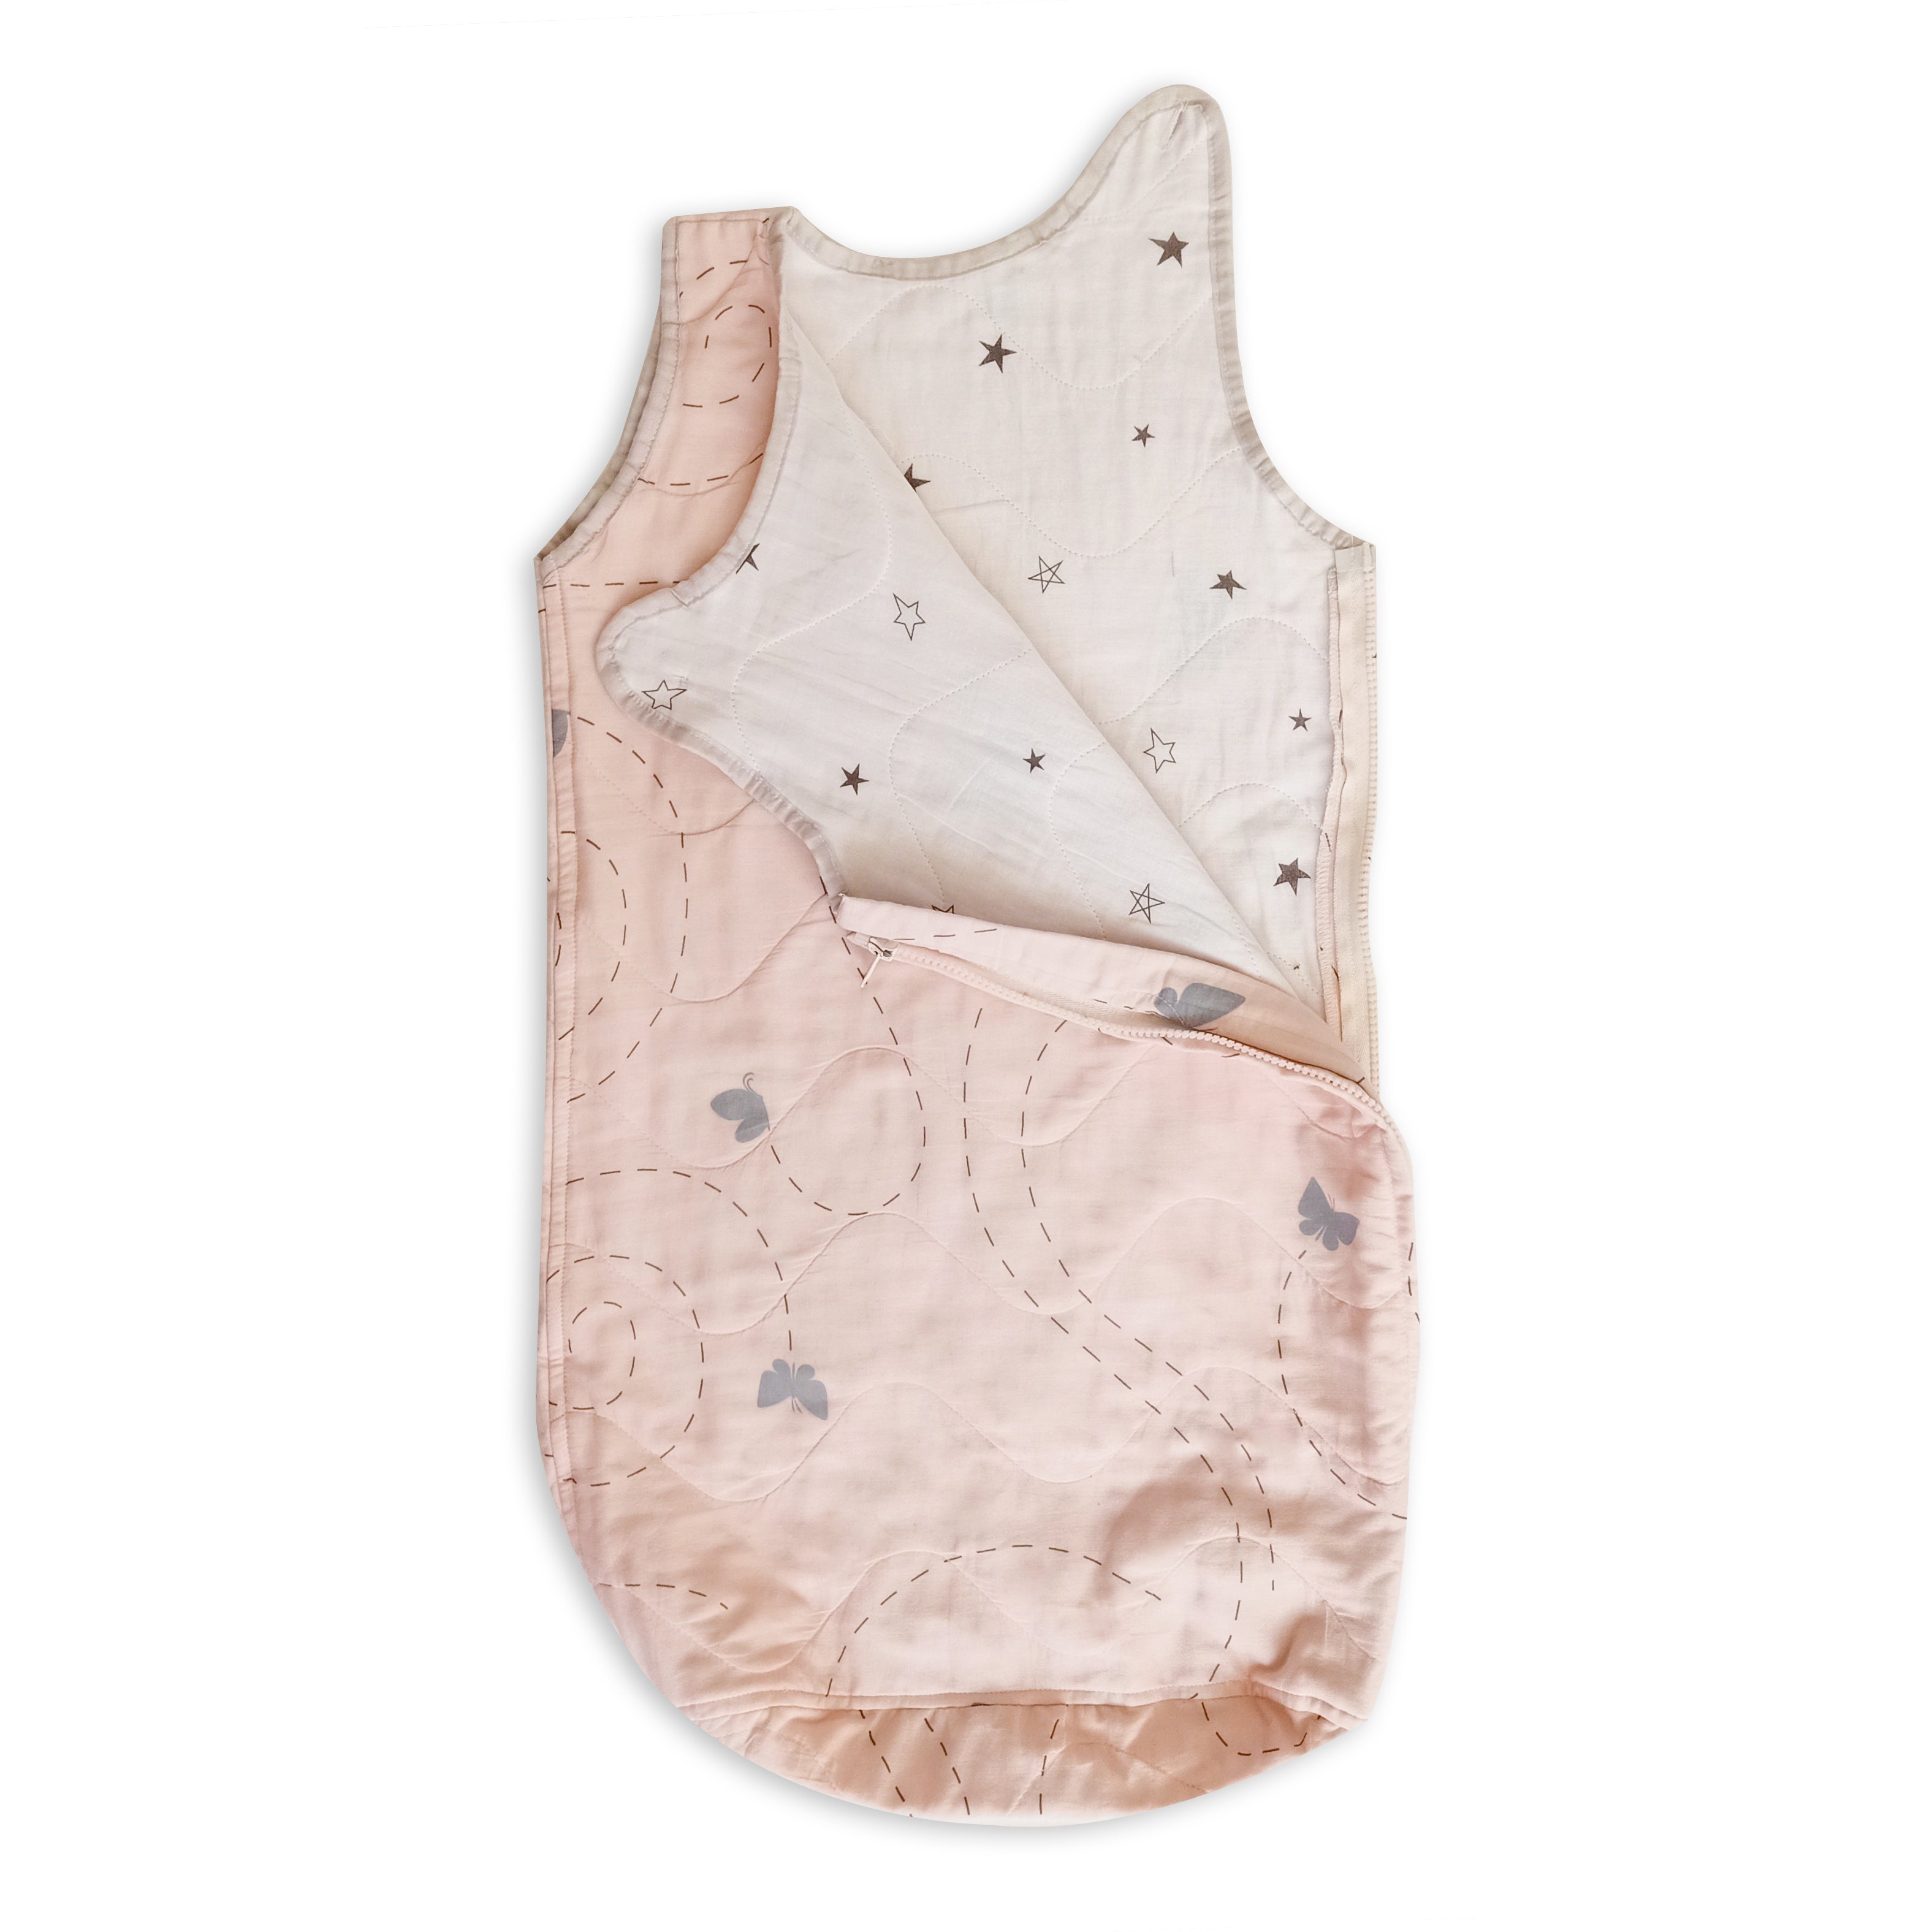 The White Cradle Baby Sleeping Bag - Butterfly